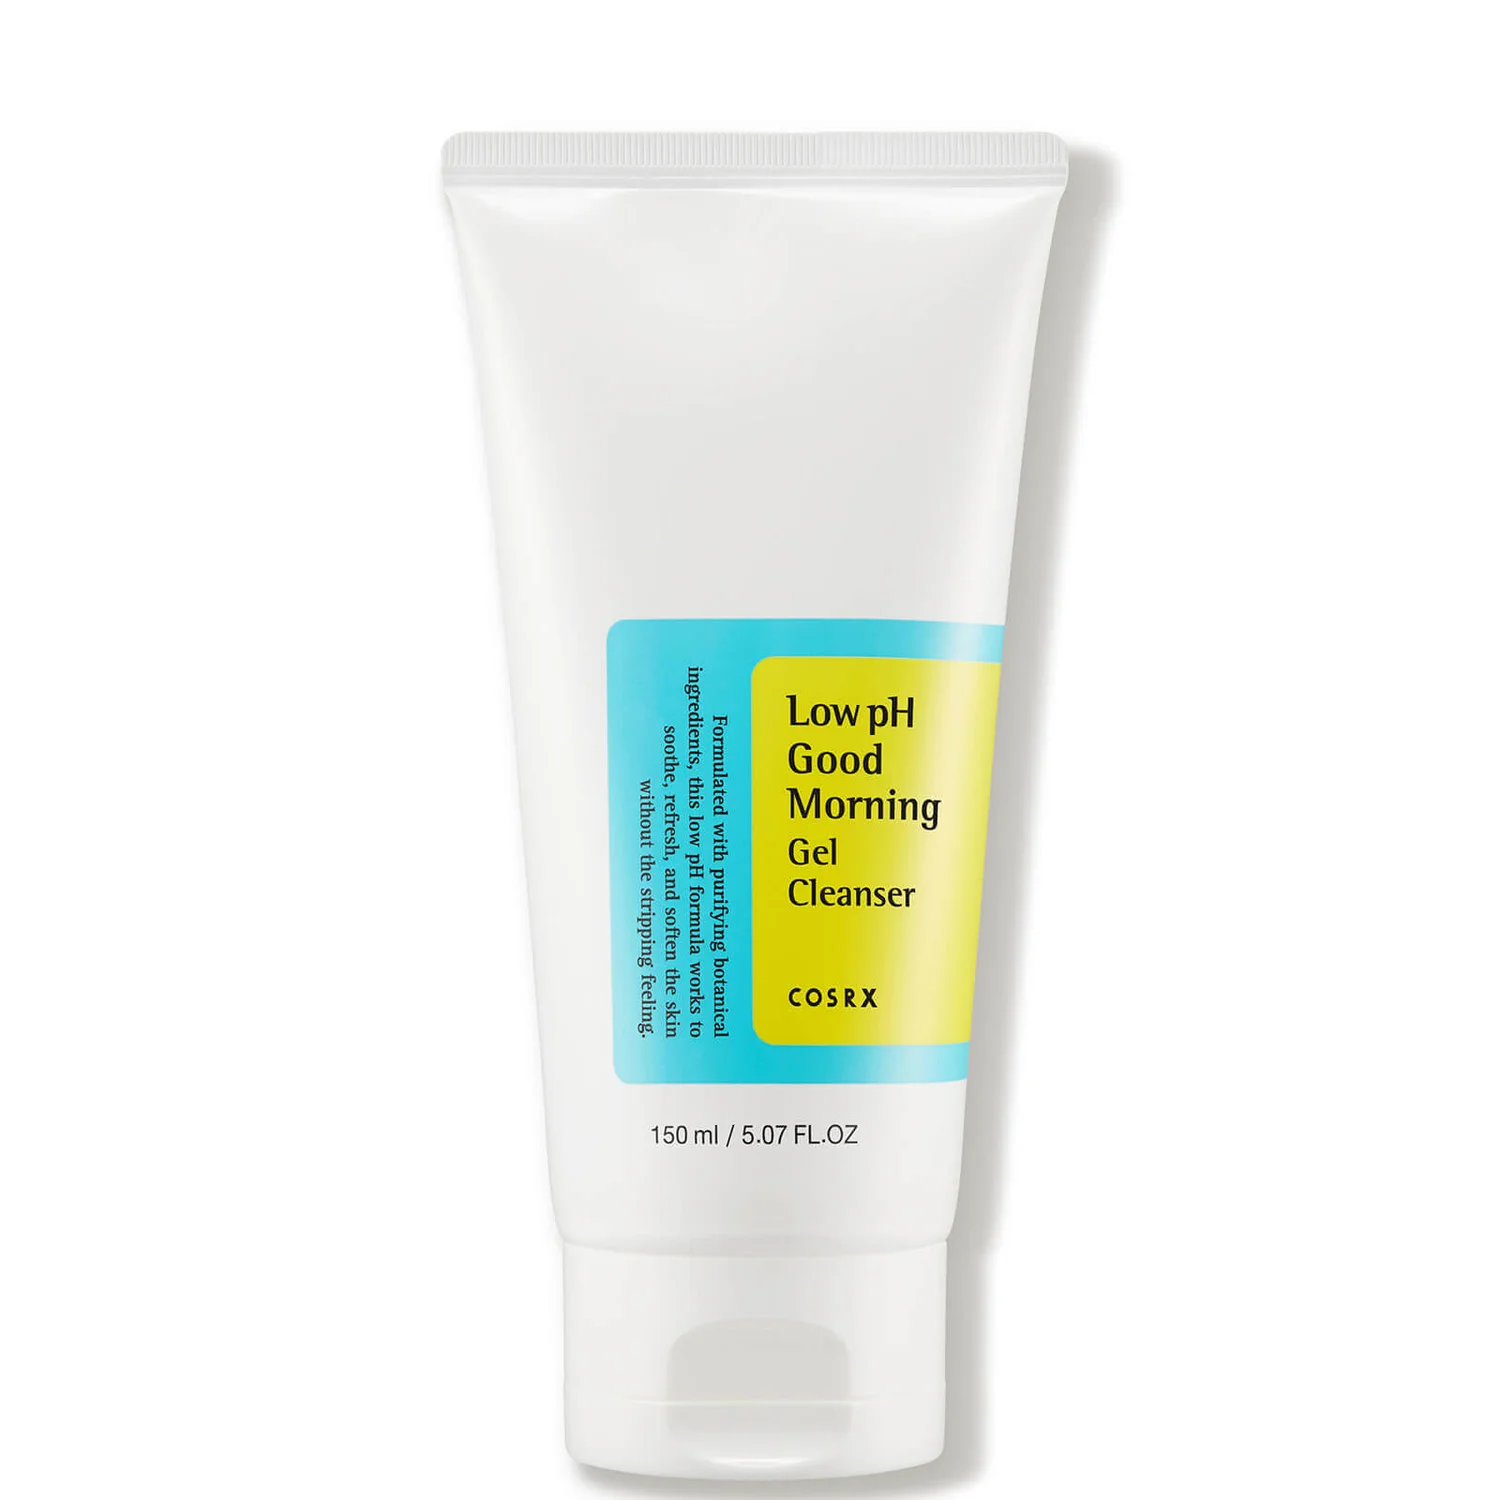 A white, blue, and yellow 150-ml tube of the COSRX Low pH Good Morning Gel Cleanser. On the tube, it says: Low pH Good Morning Gel Cleanser COSRX, Formulated with purifying botanical ingredients, this low pH formula works to soothe, refresh, and soften the skin without the stripping feeling.
